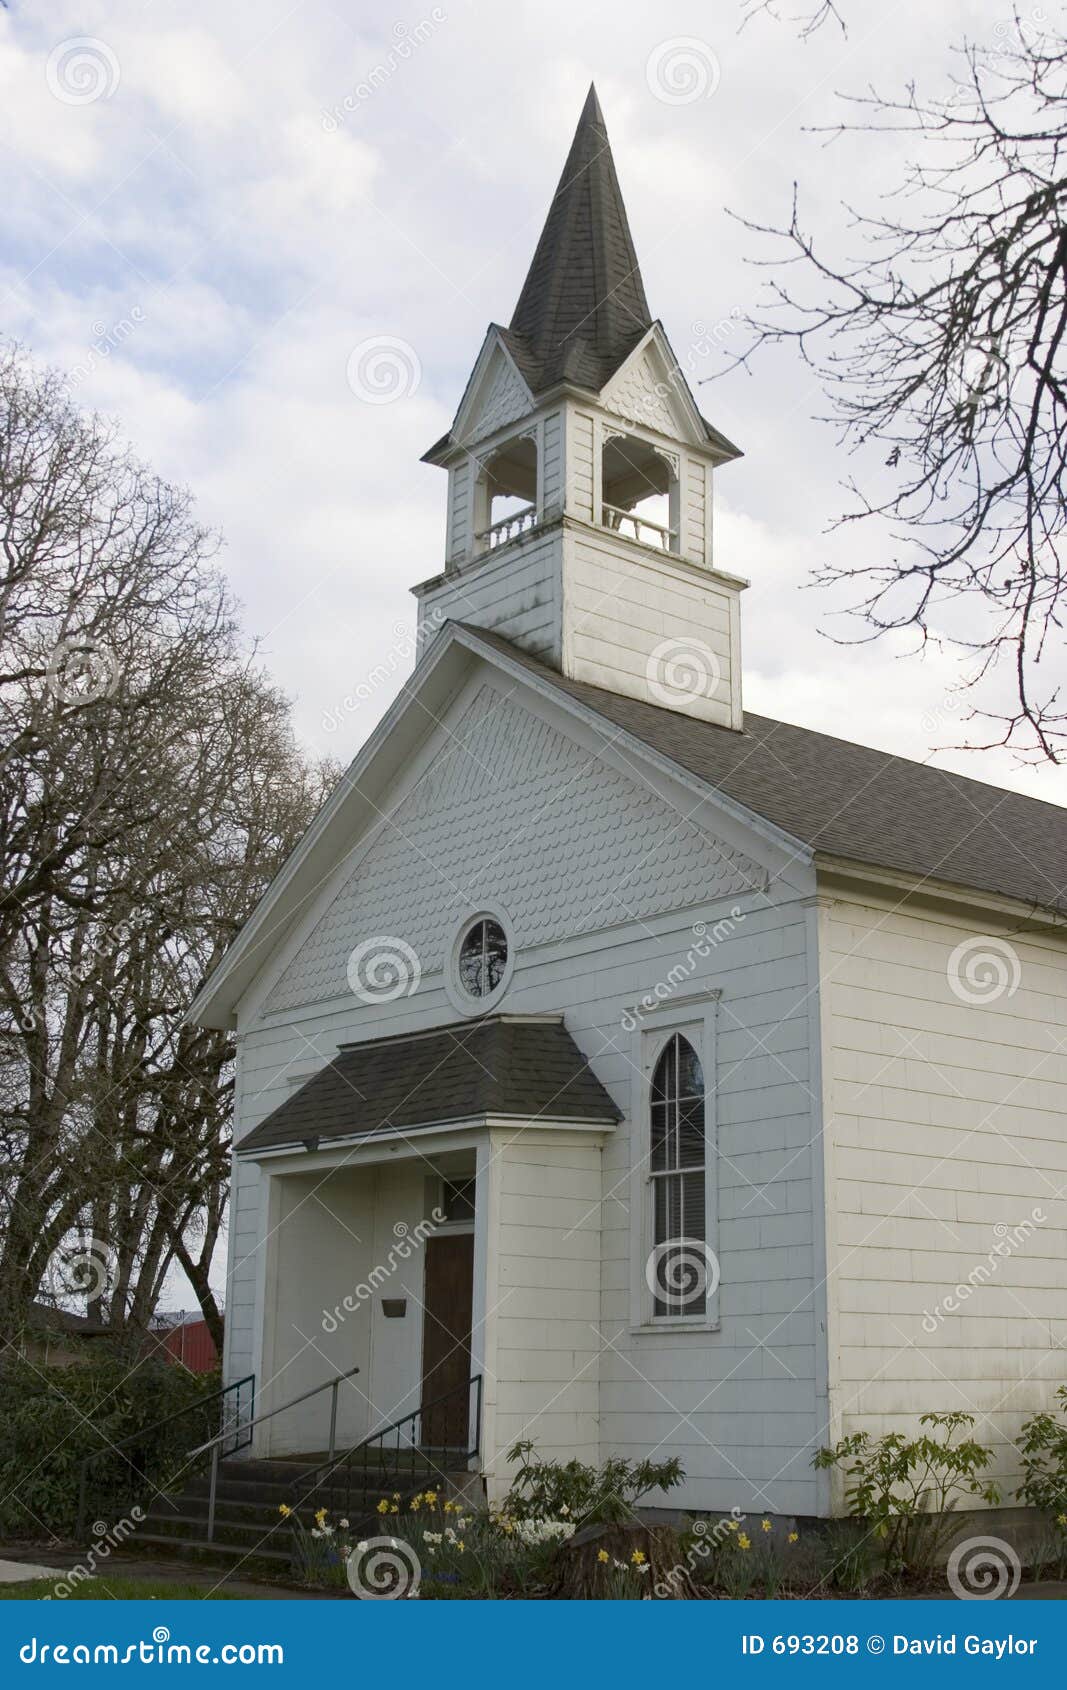 Small country church stock photo. Image of tower, church - 693208